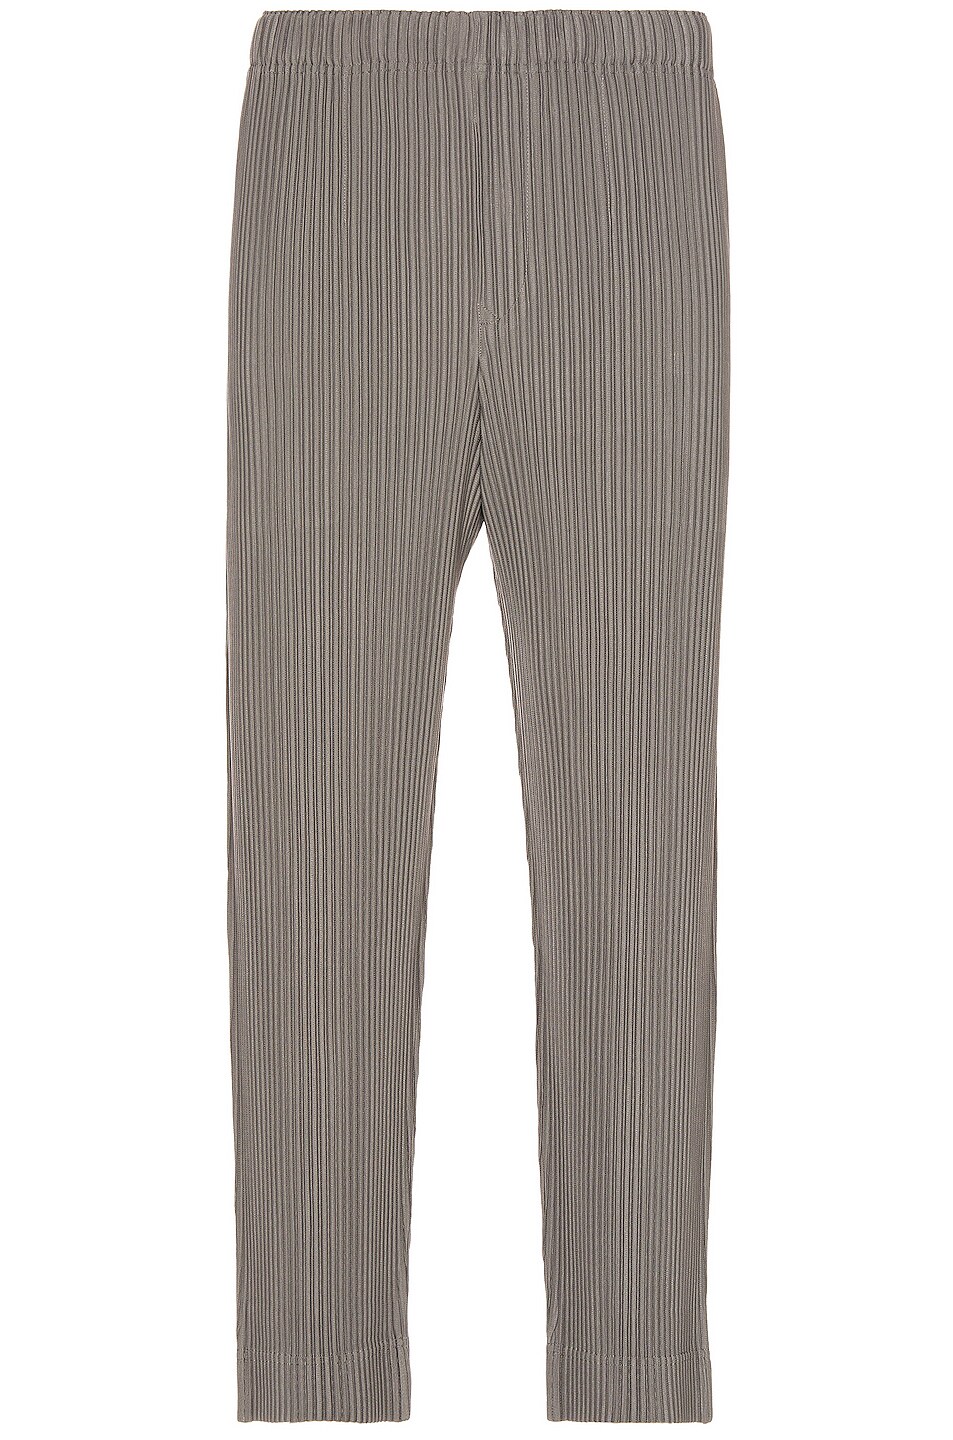 Image 1 of Homme Plisse Issey Miyake Pants in Ash Gray